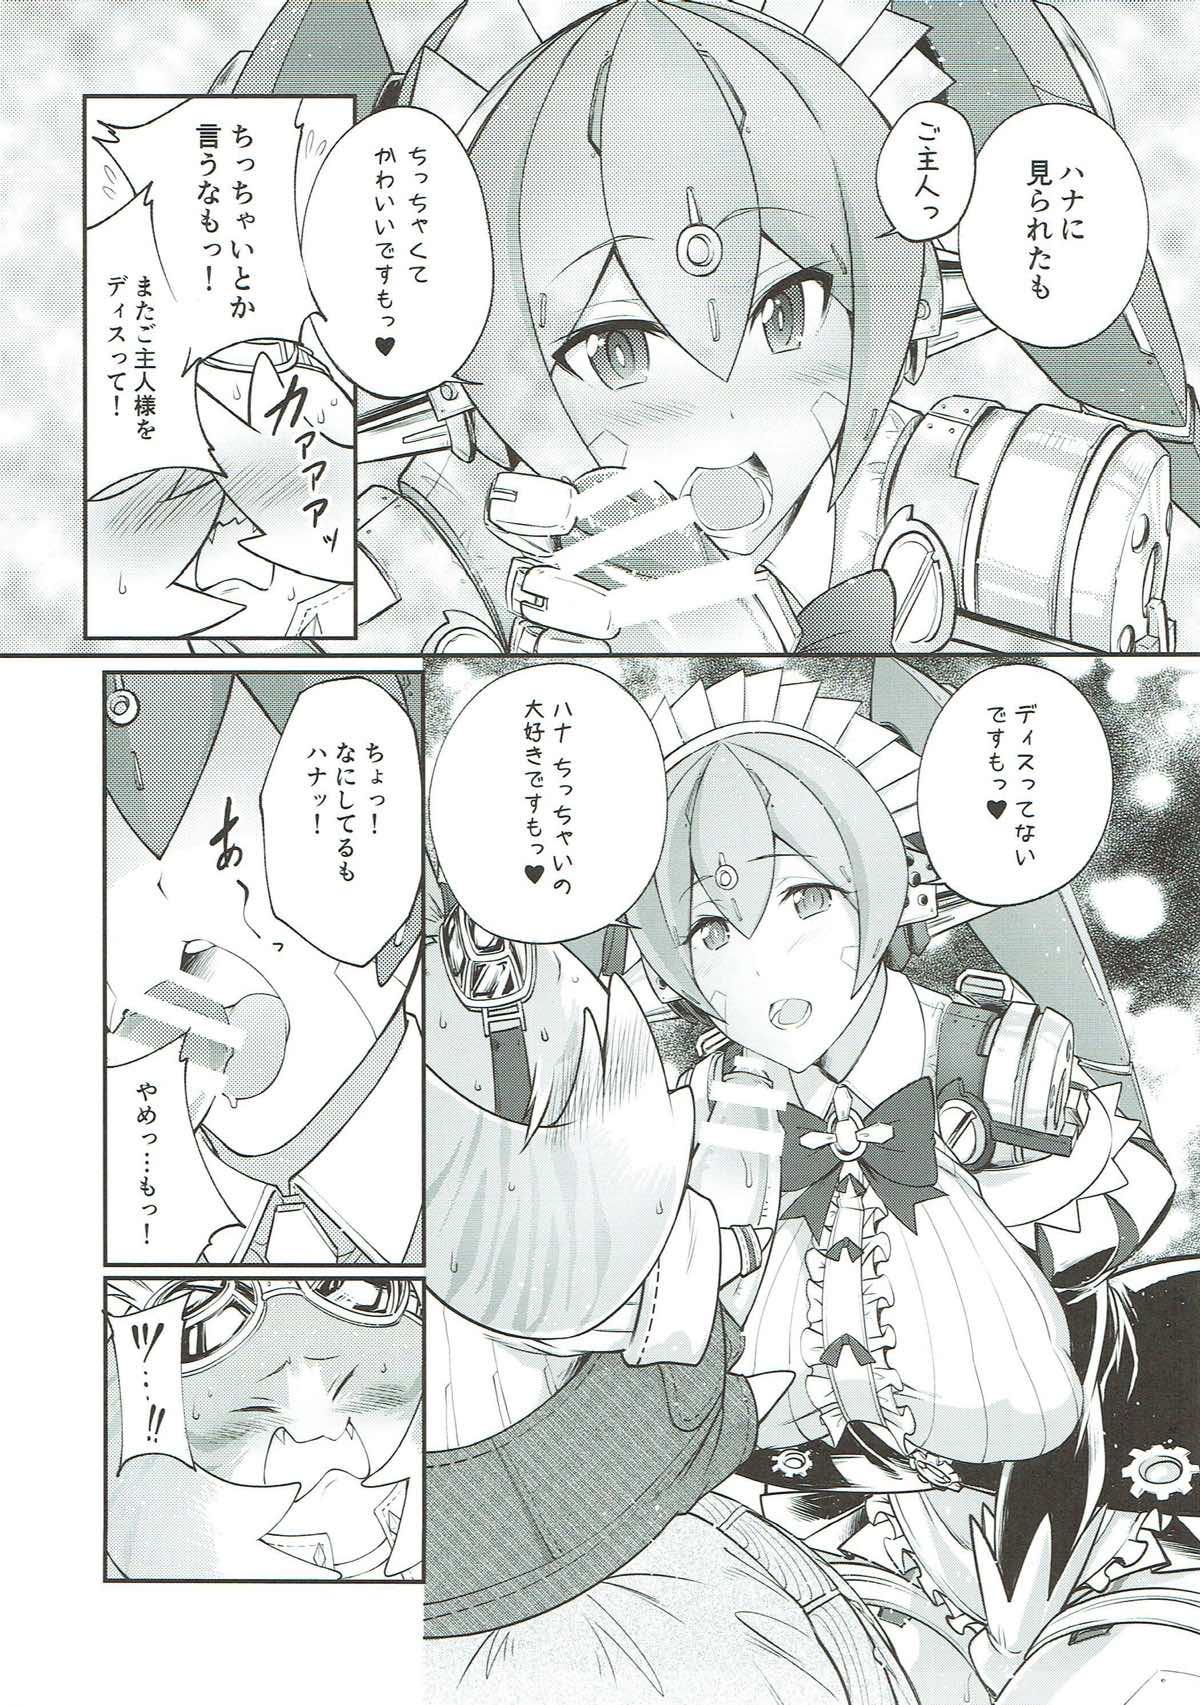 Sluts Tiger x Flower - Xenoblade chronicles 2 Mature - Page 6